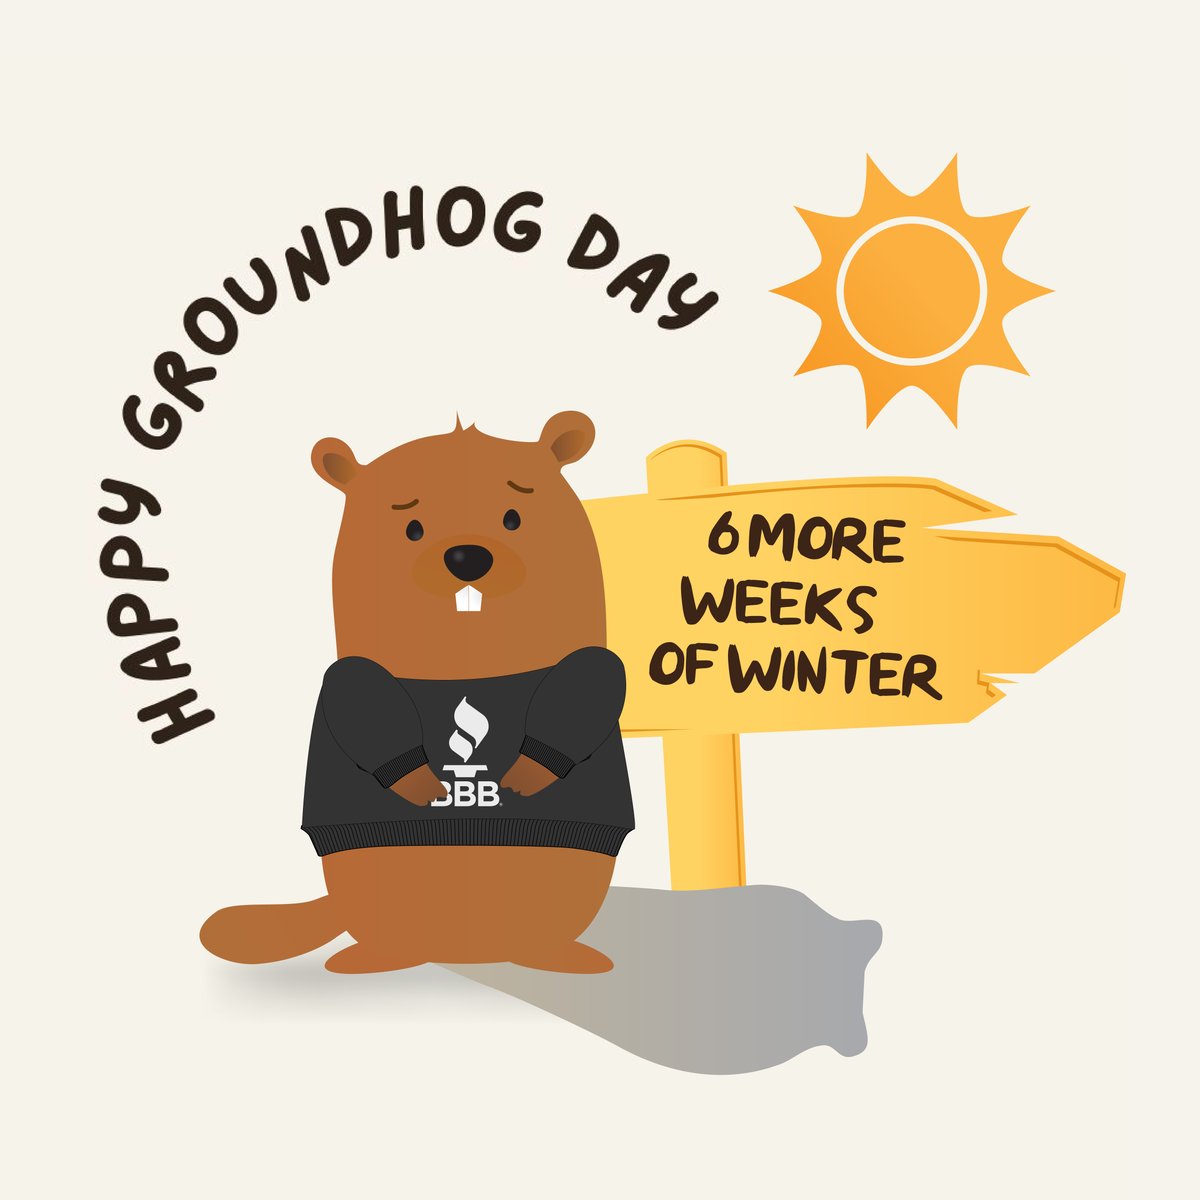 #HappyGroundhogDay! This morning, furry weather-watcher Punxsutawney Phil woke up and saw his shadow. With six weeks of continuing cold weather, scammers will try to take advantage. Don't get iced - check out BBB's tips for avoiding winter scams on BBB.org/ChicagoBuzz